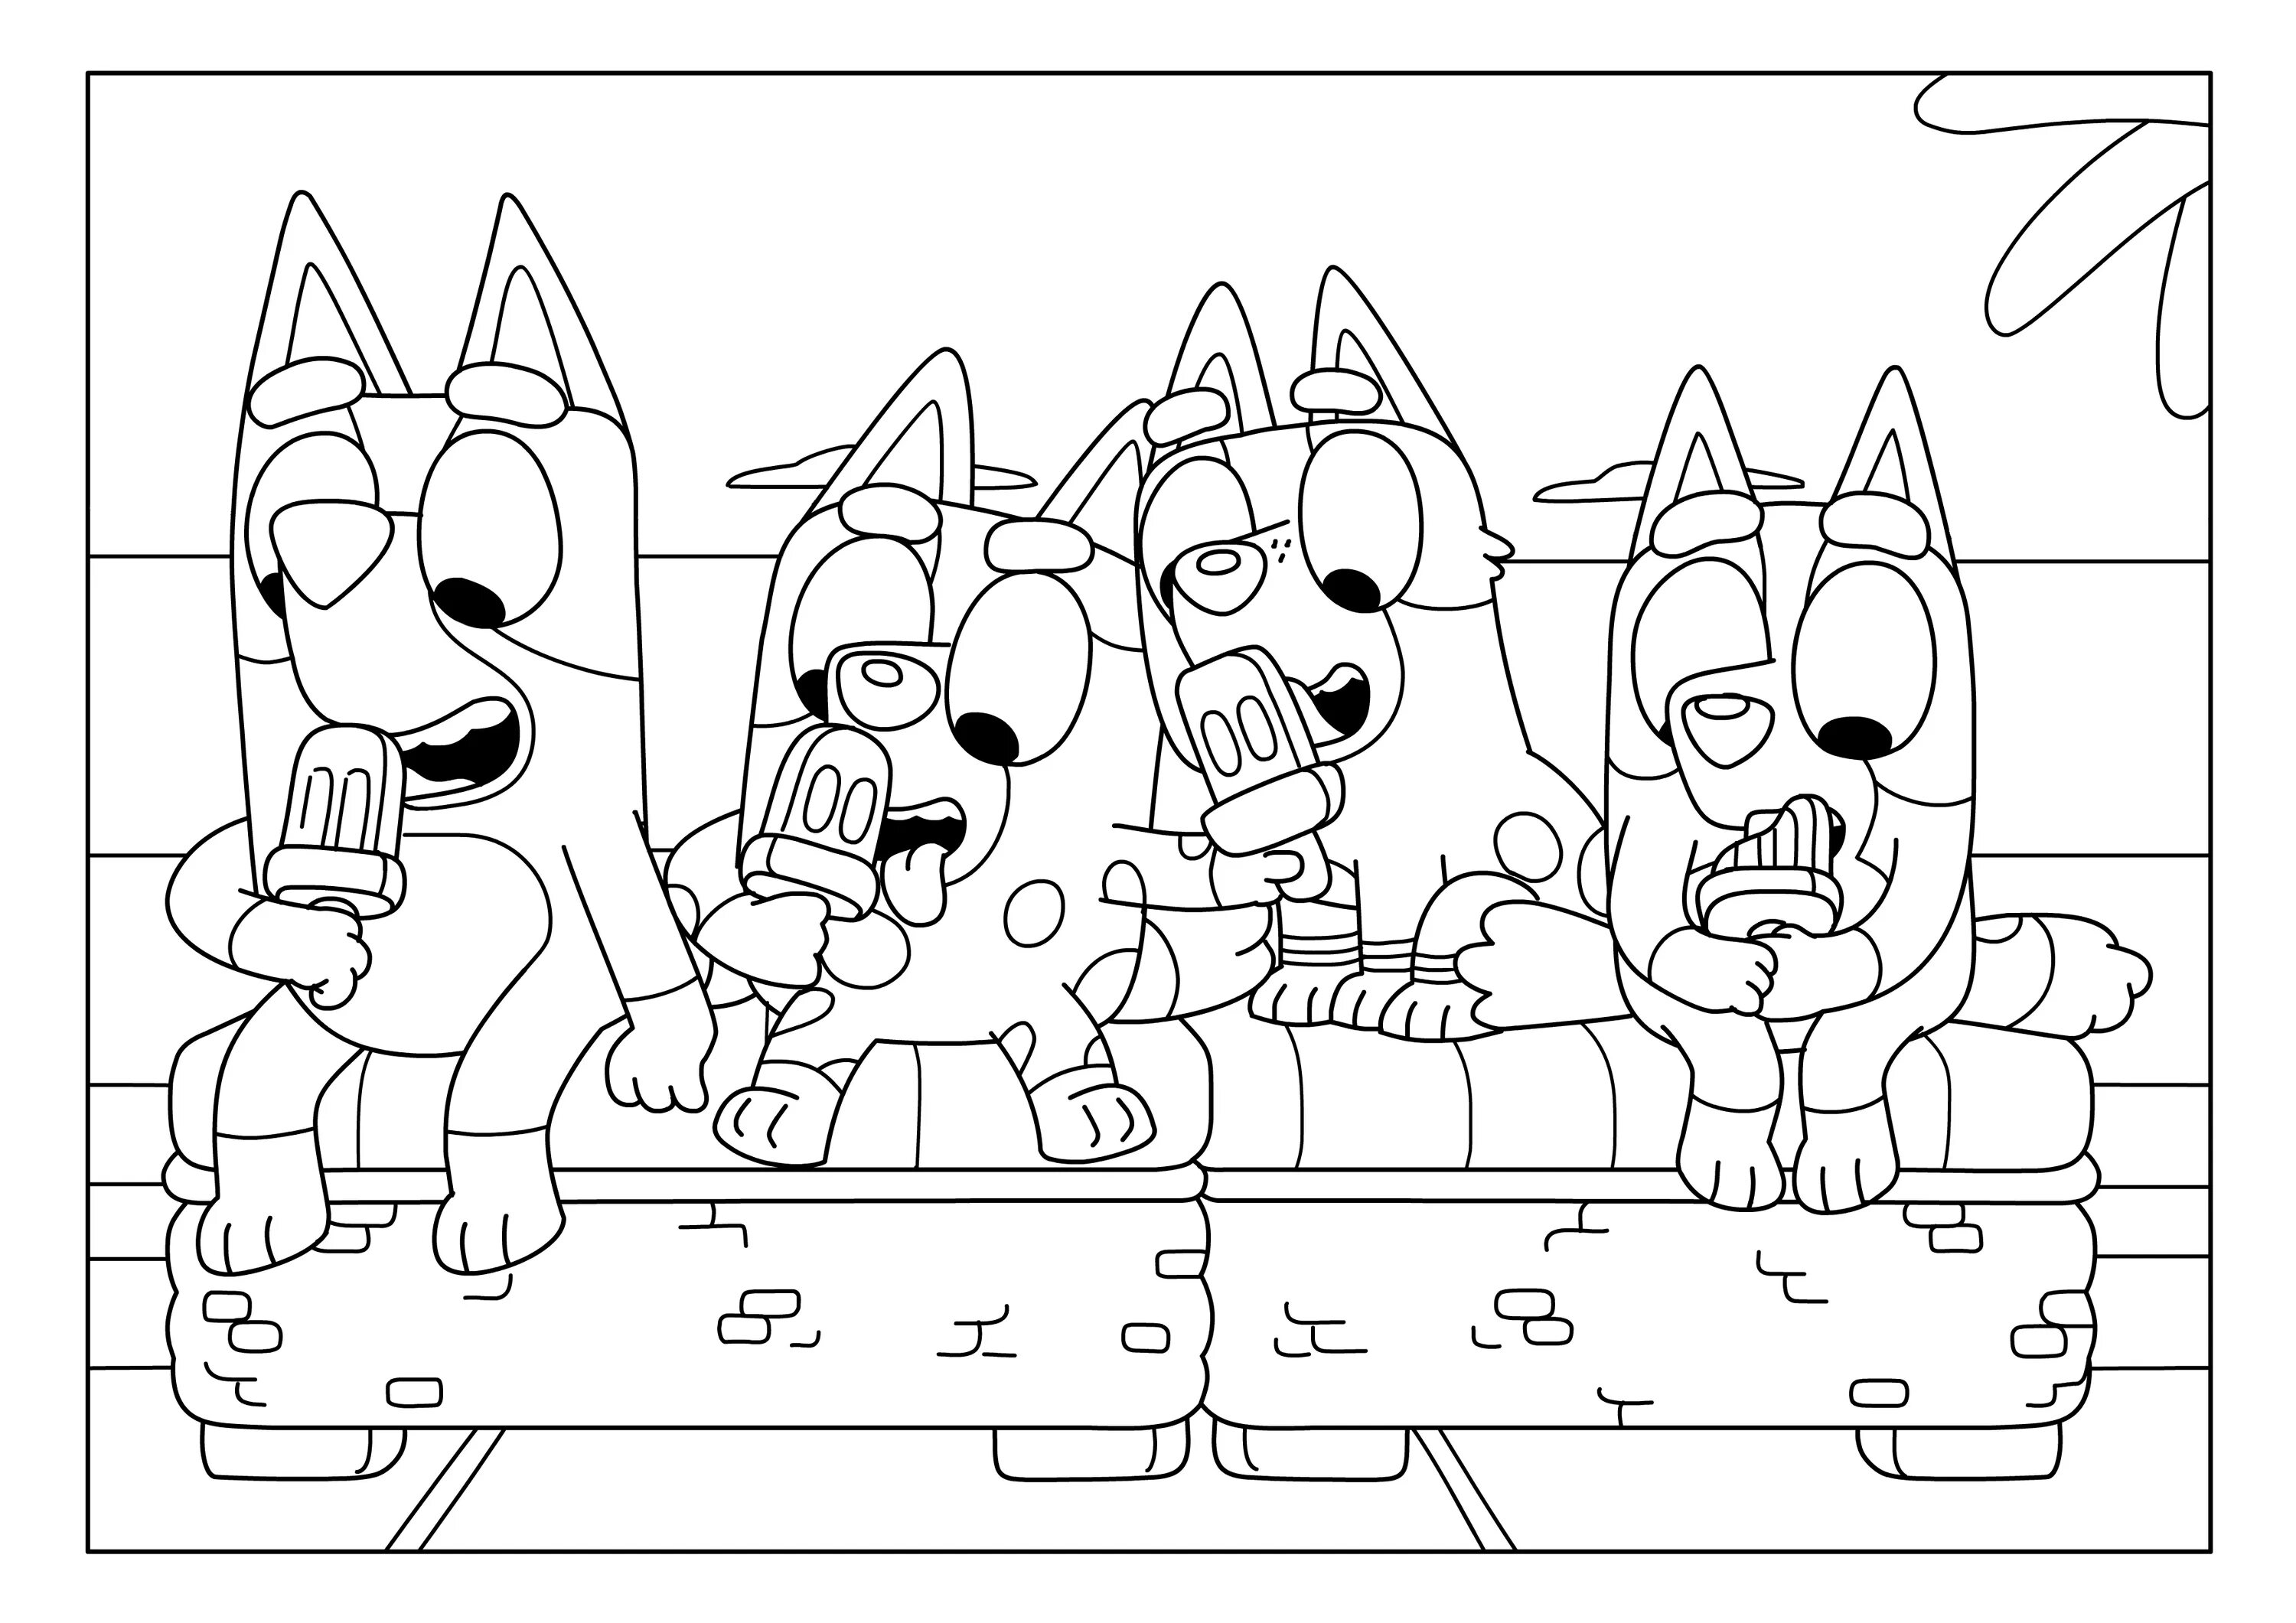 Bloom dog coloring page refreshing